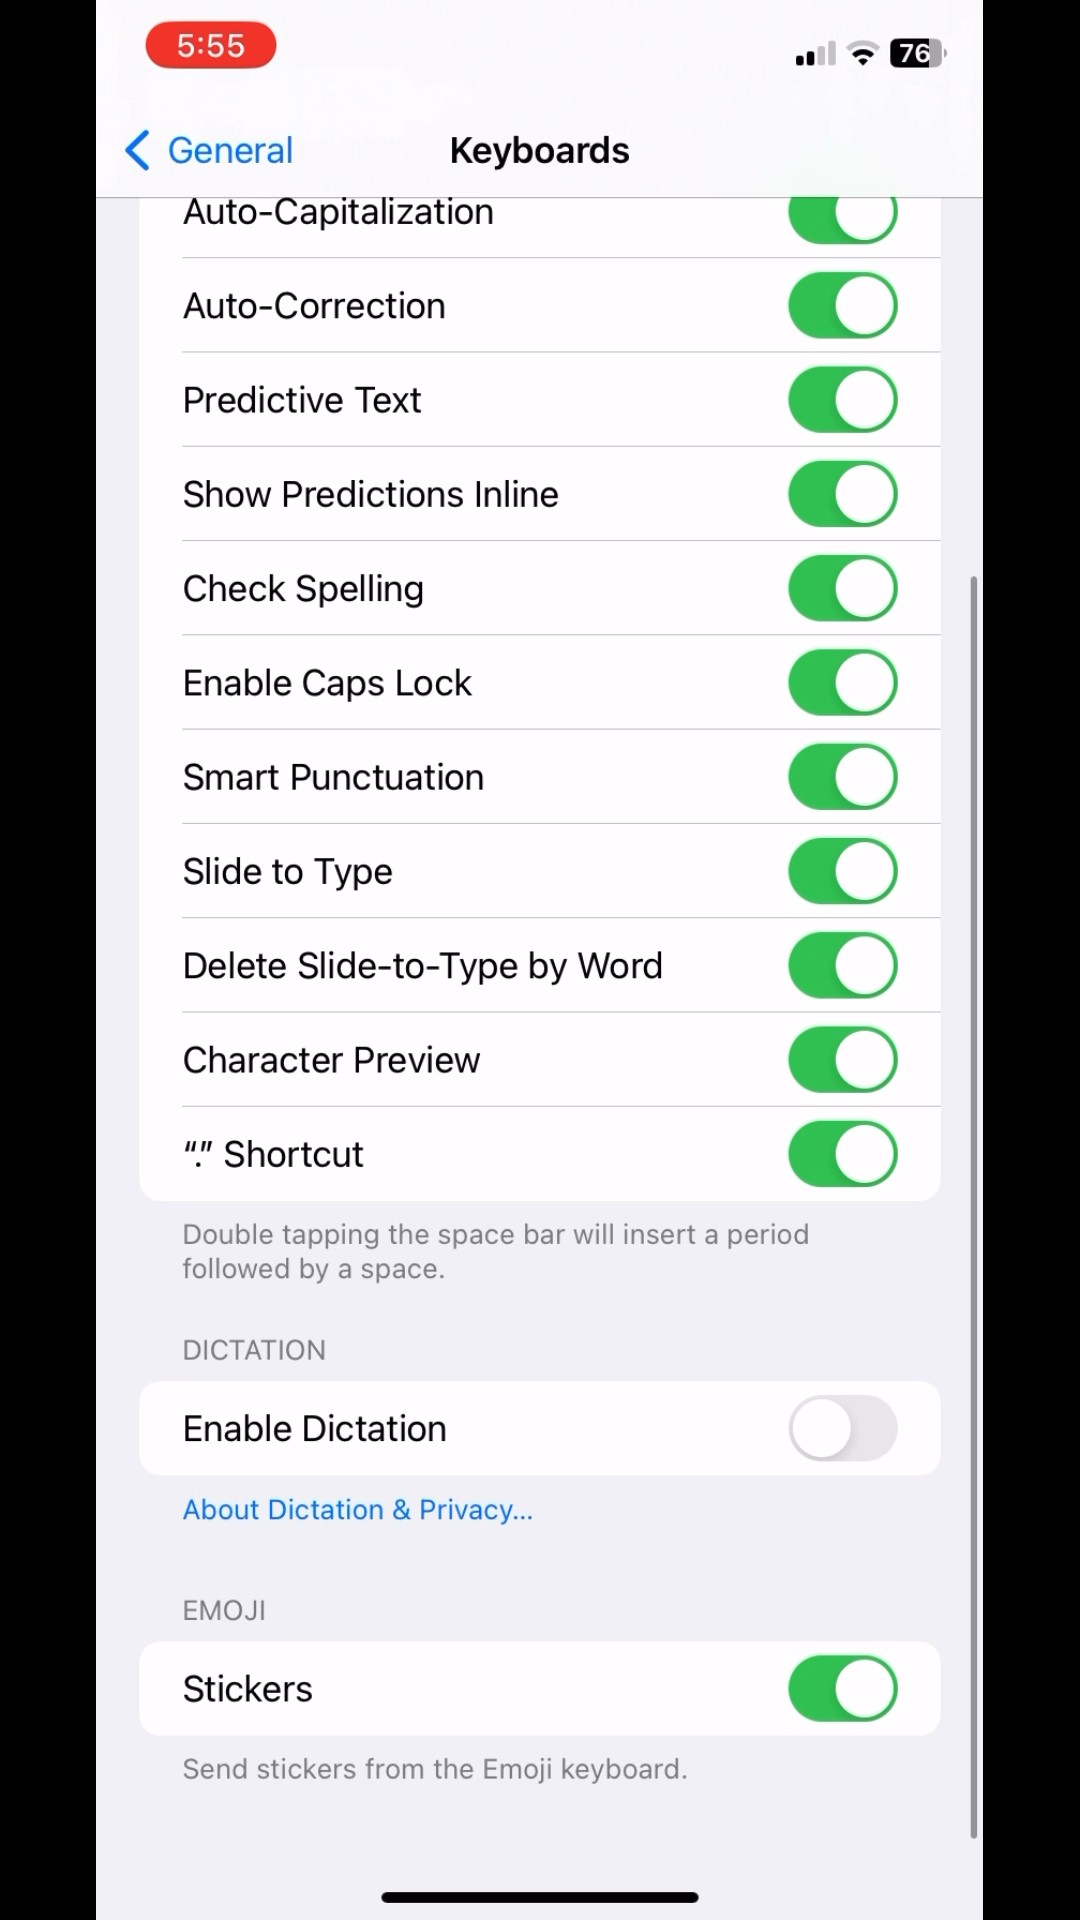 How to enable voice dictation on iPhone #iphonetricks #iphone #dictation #turnon #iphonetips #ios